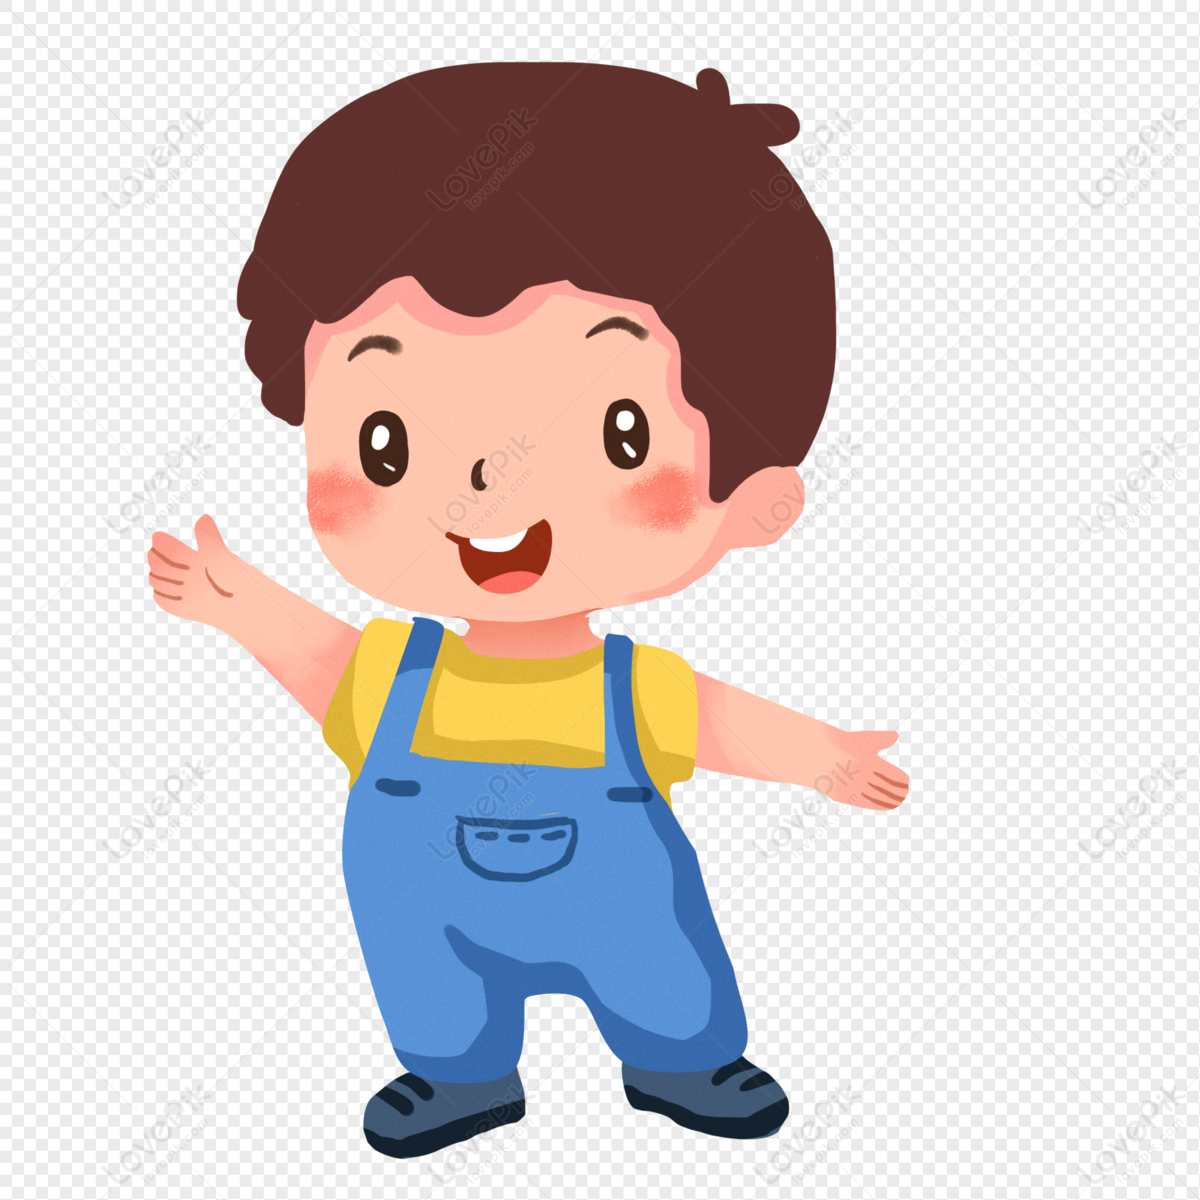 Little Boy Png Transparent Image And Clipart Image For Free Download -  Lovepik | 401290827